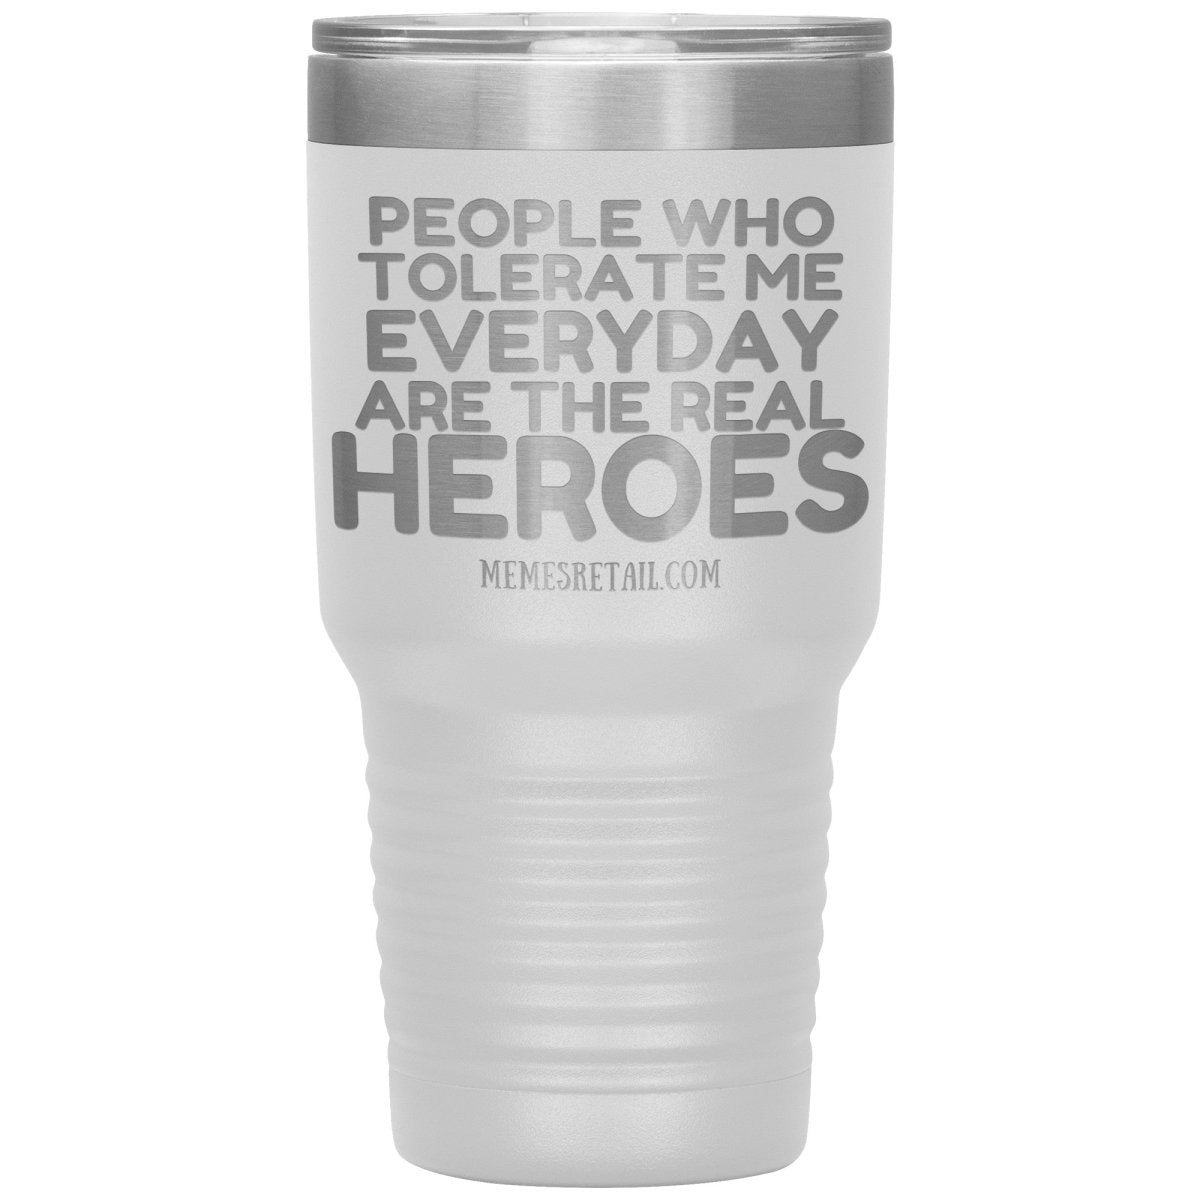 People Who Tolerate Me Everyday Are The Real Heroes Tumblers, 30oz Insulated Tumbler / White - MemesRetail.com